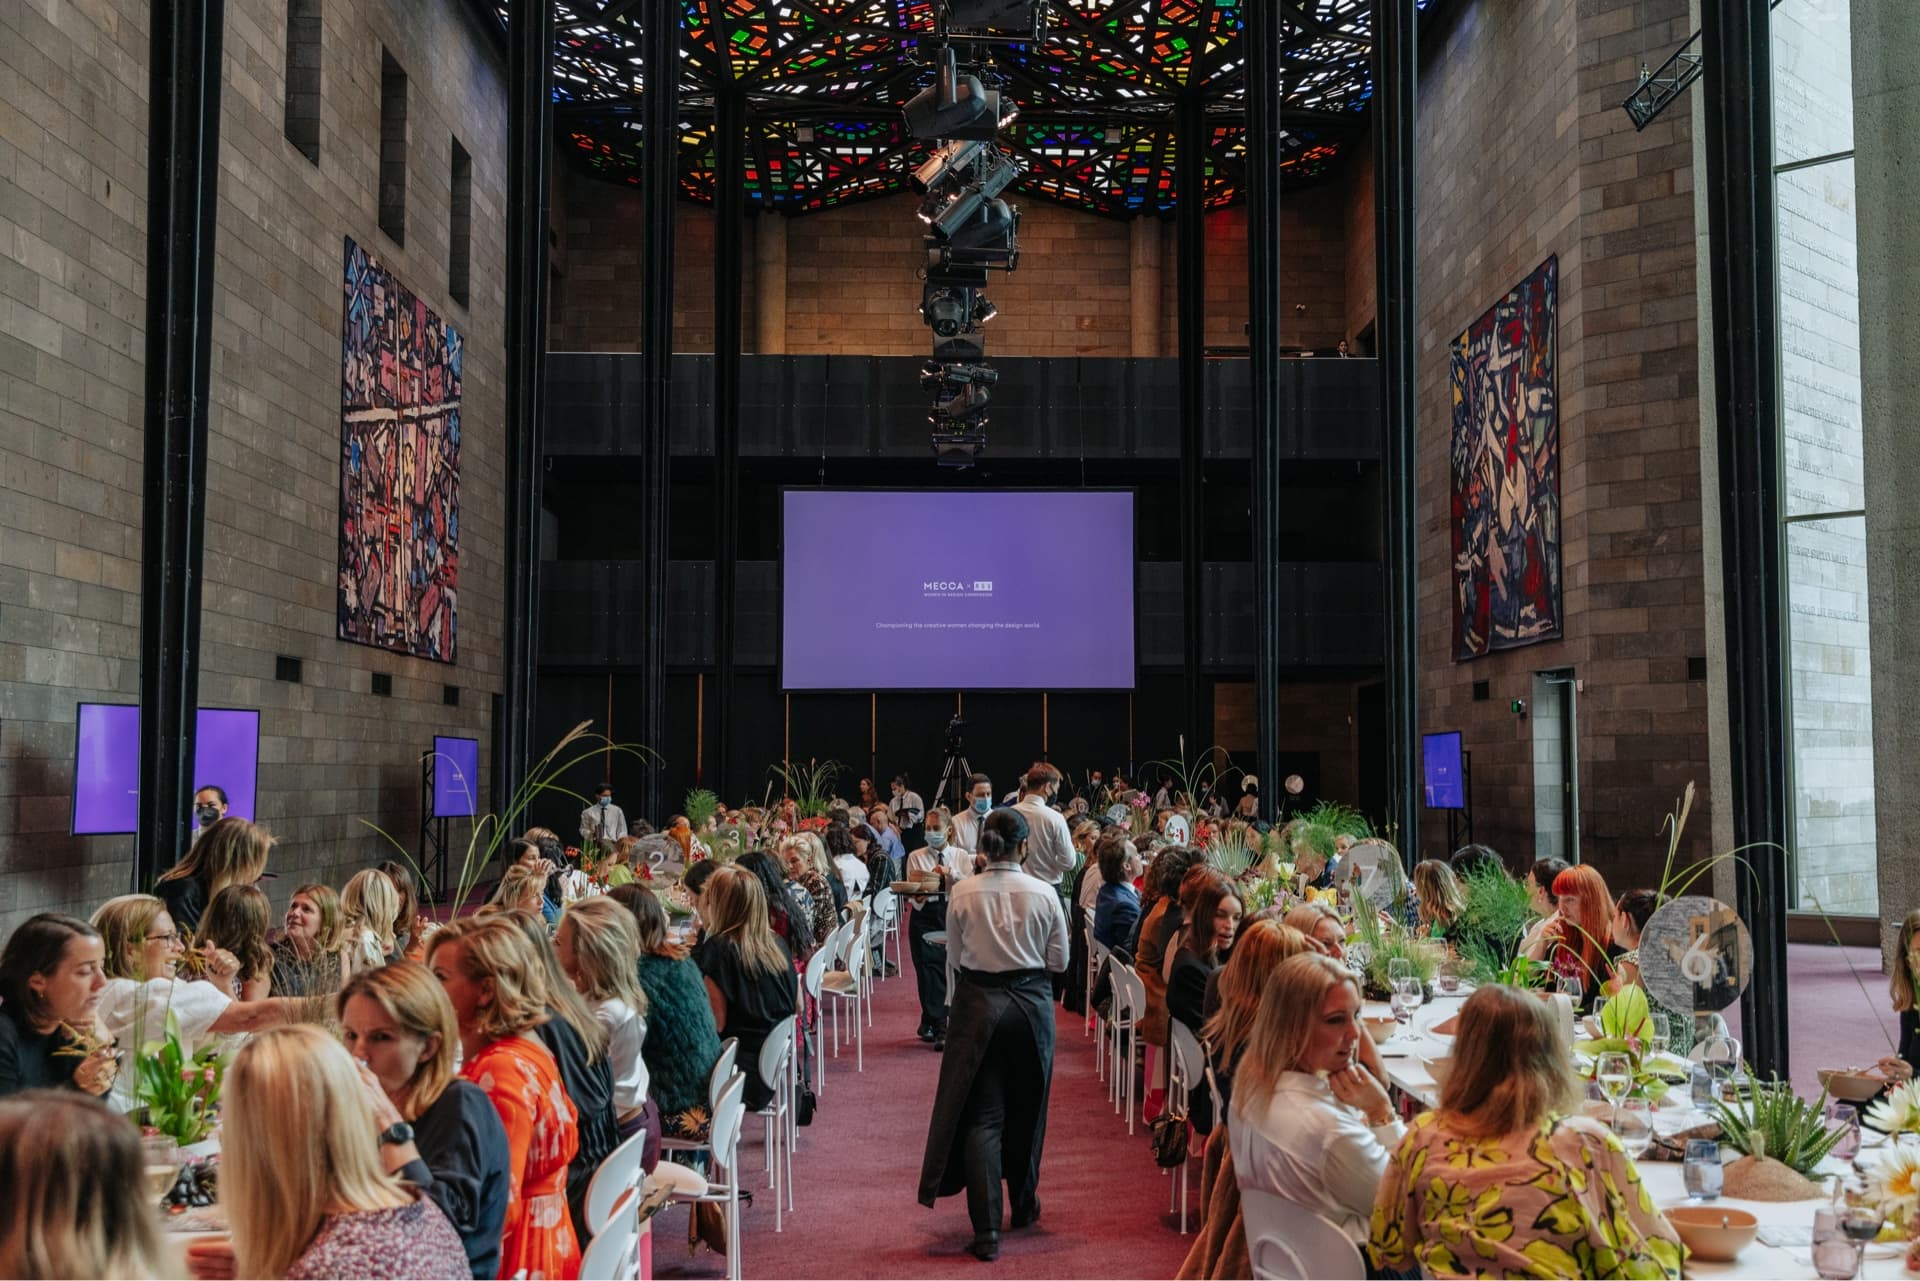 MECCA x NGV Women in Design Commission, International Women’s Day lunch in the NGV Great Hall